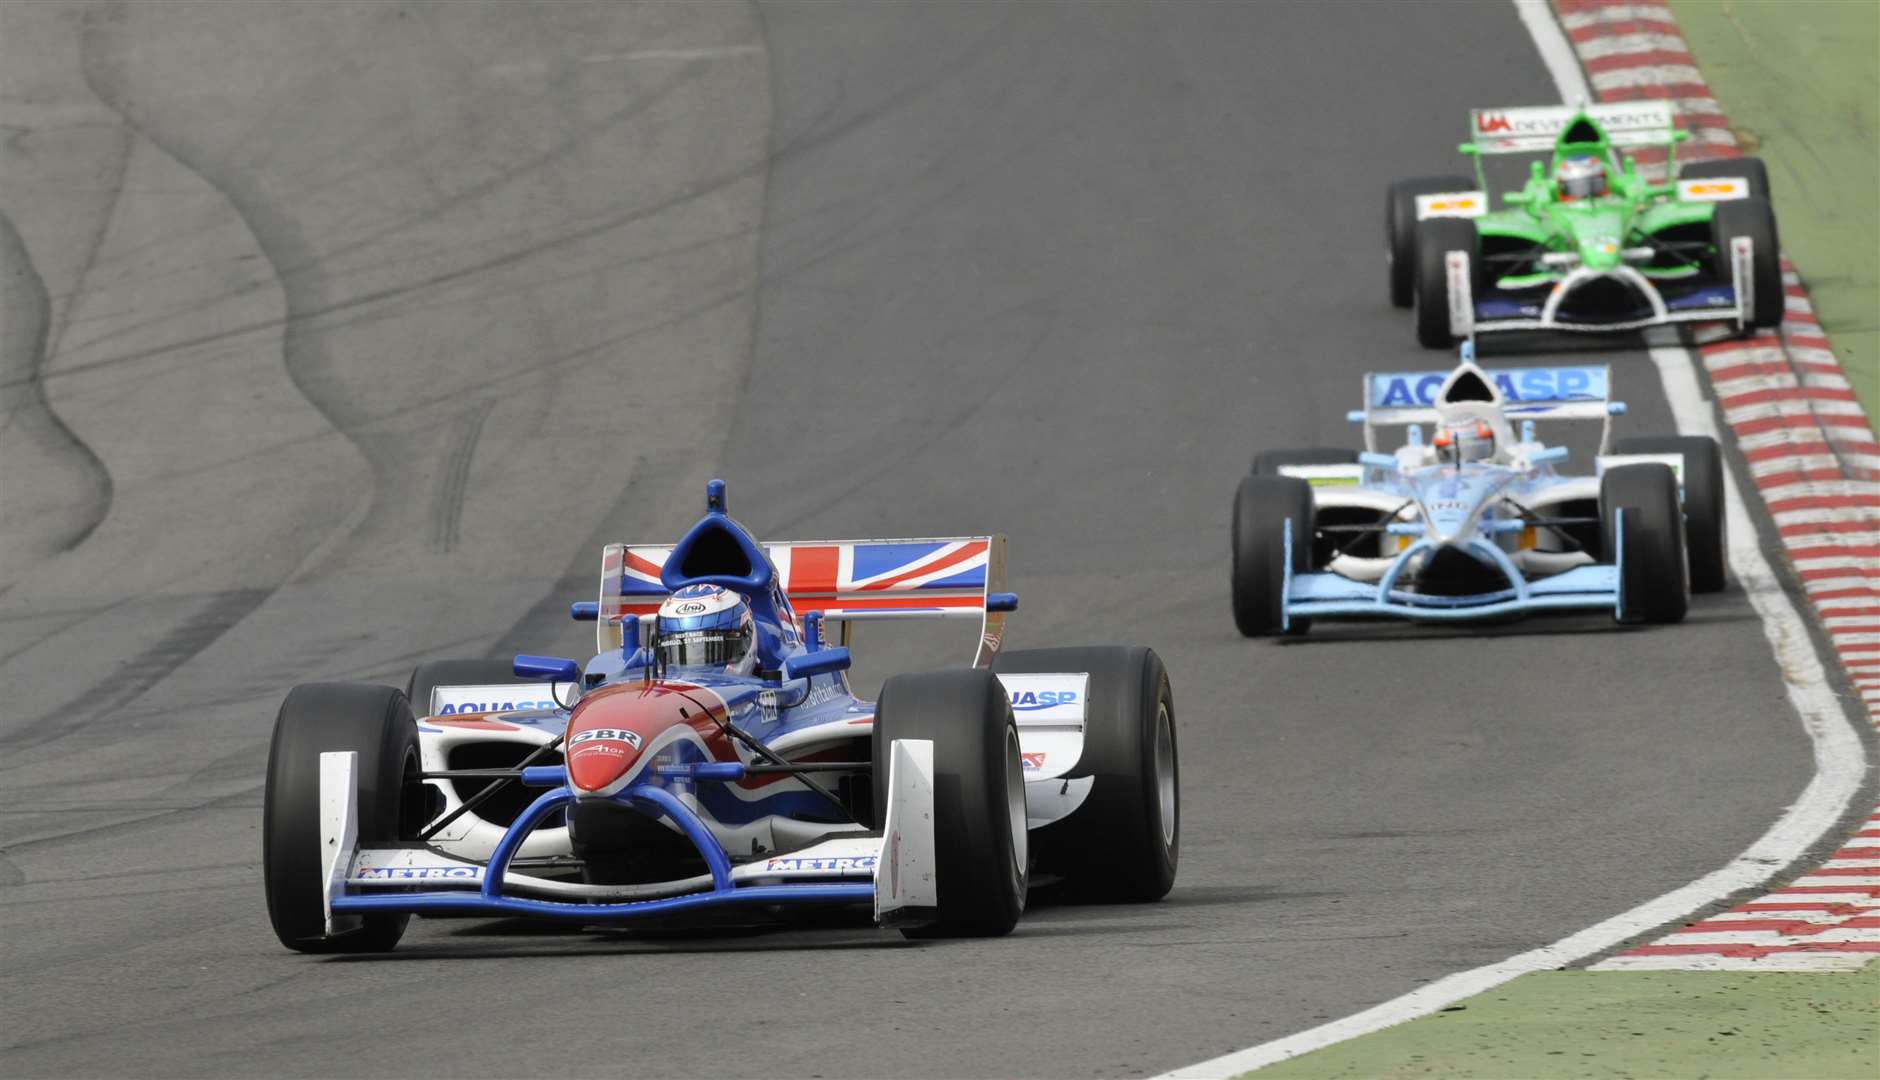 Team GB's Robbie Kerr went into the lead of the feature race in 2008 after the first round of pitstops, but the Englishman lost top-spot when his team produced a slow service later on. Picture: Andy Payton